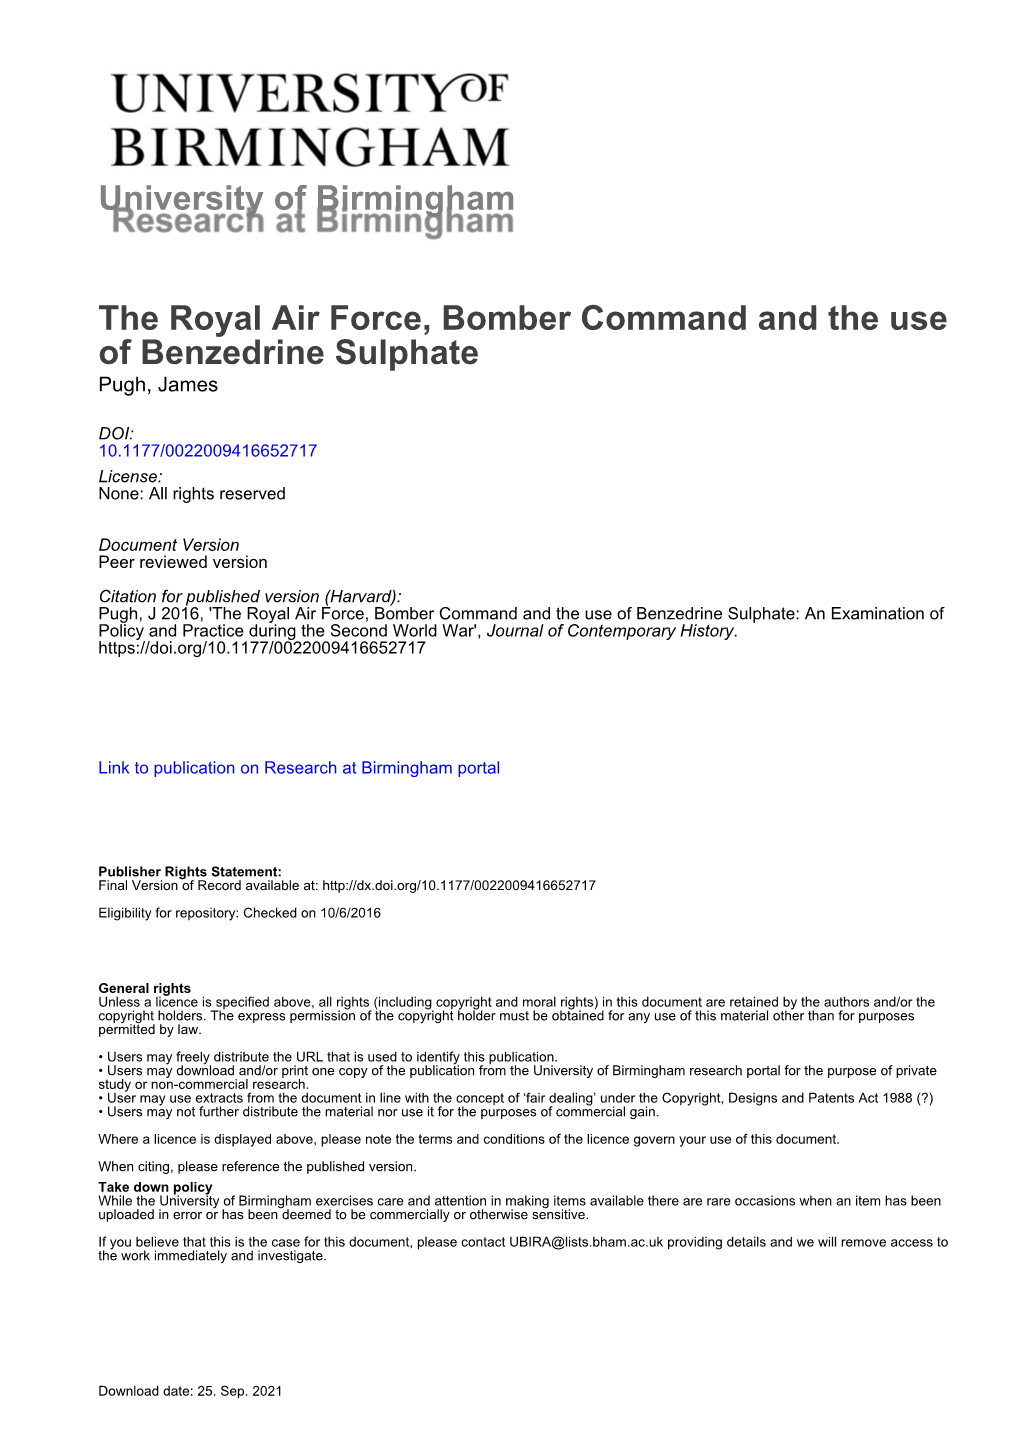 University of Birmingham the Royal Air Force, Bomber Command And